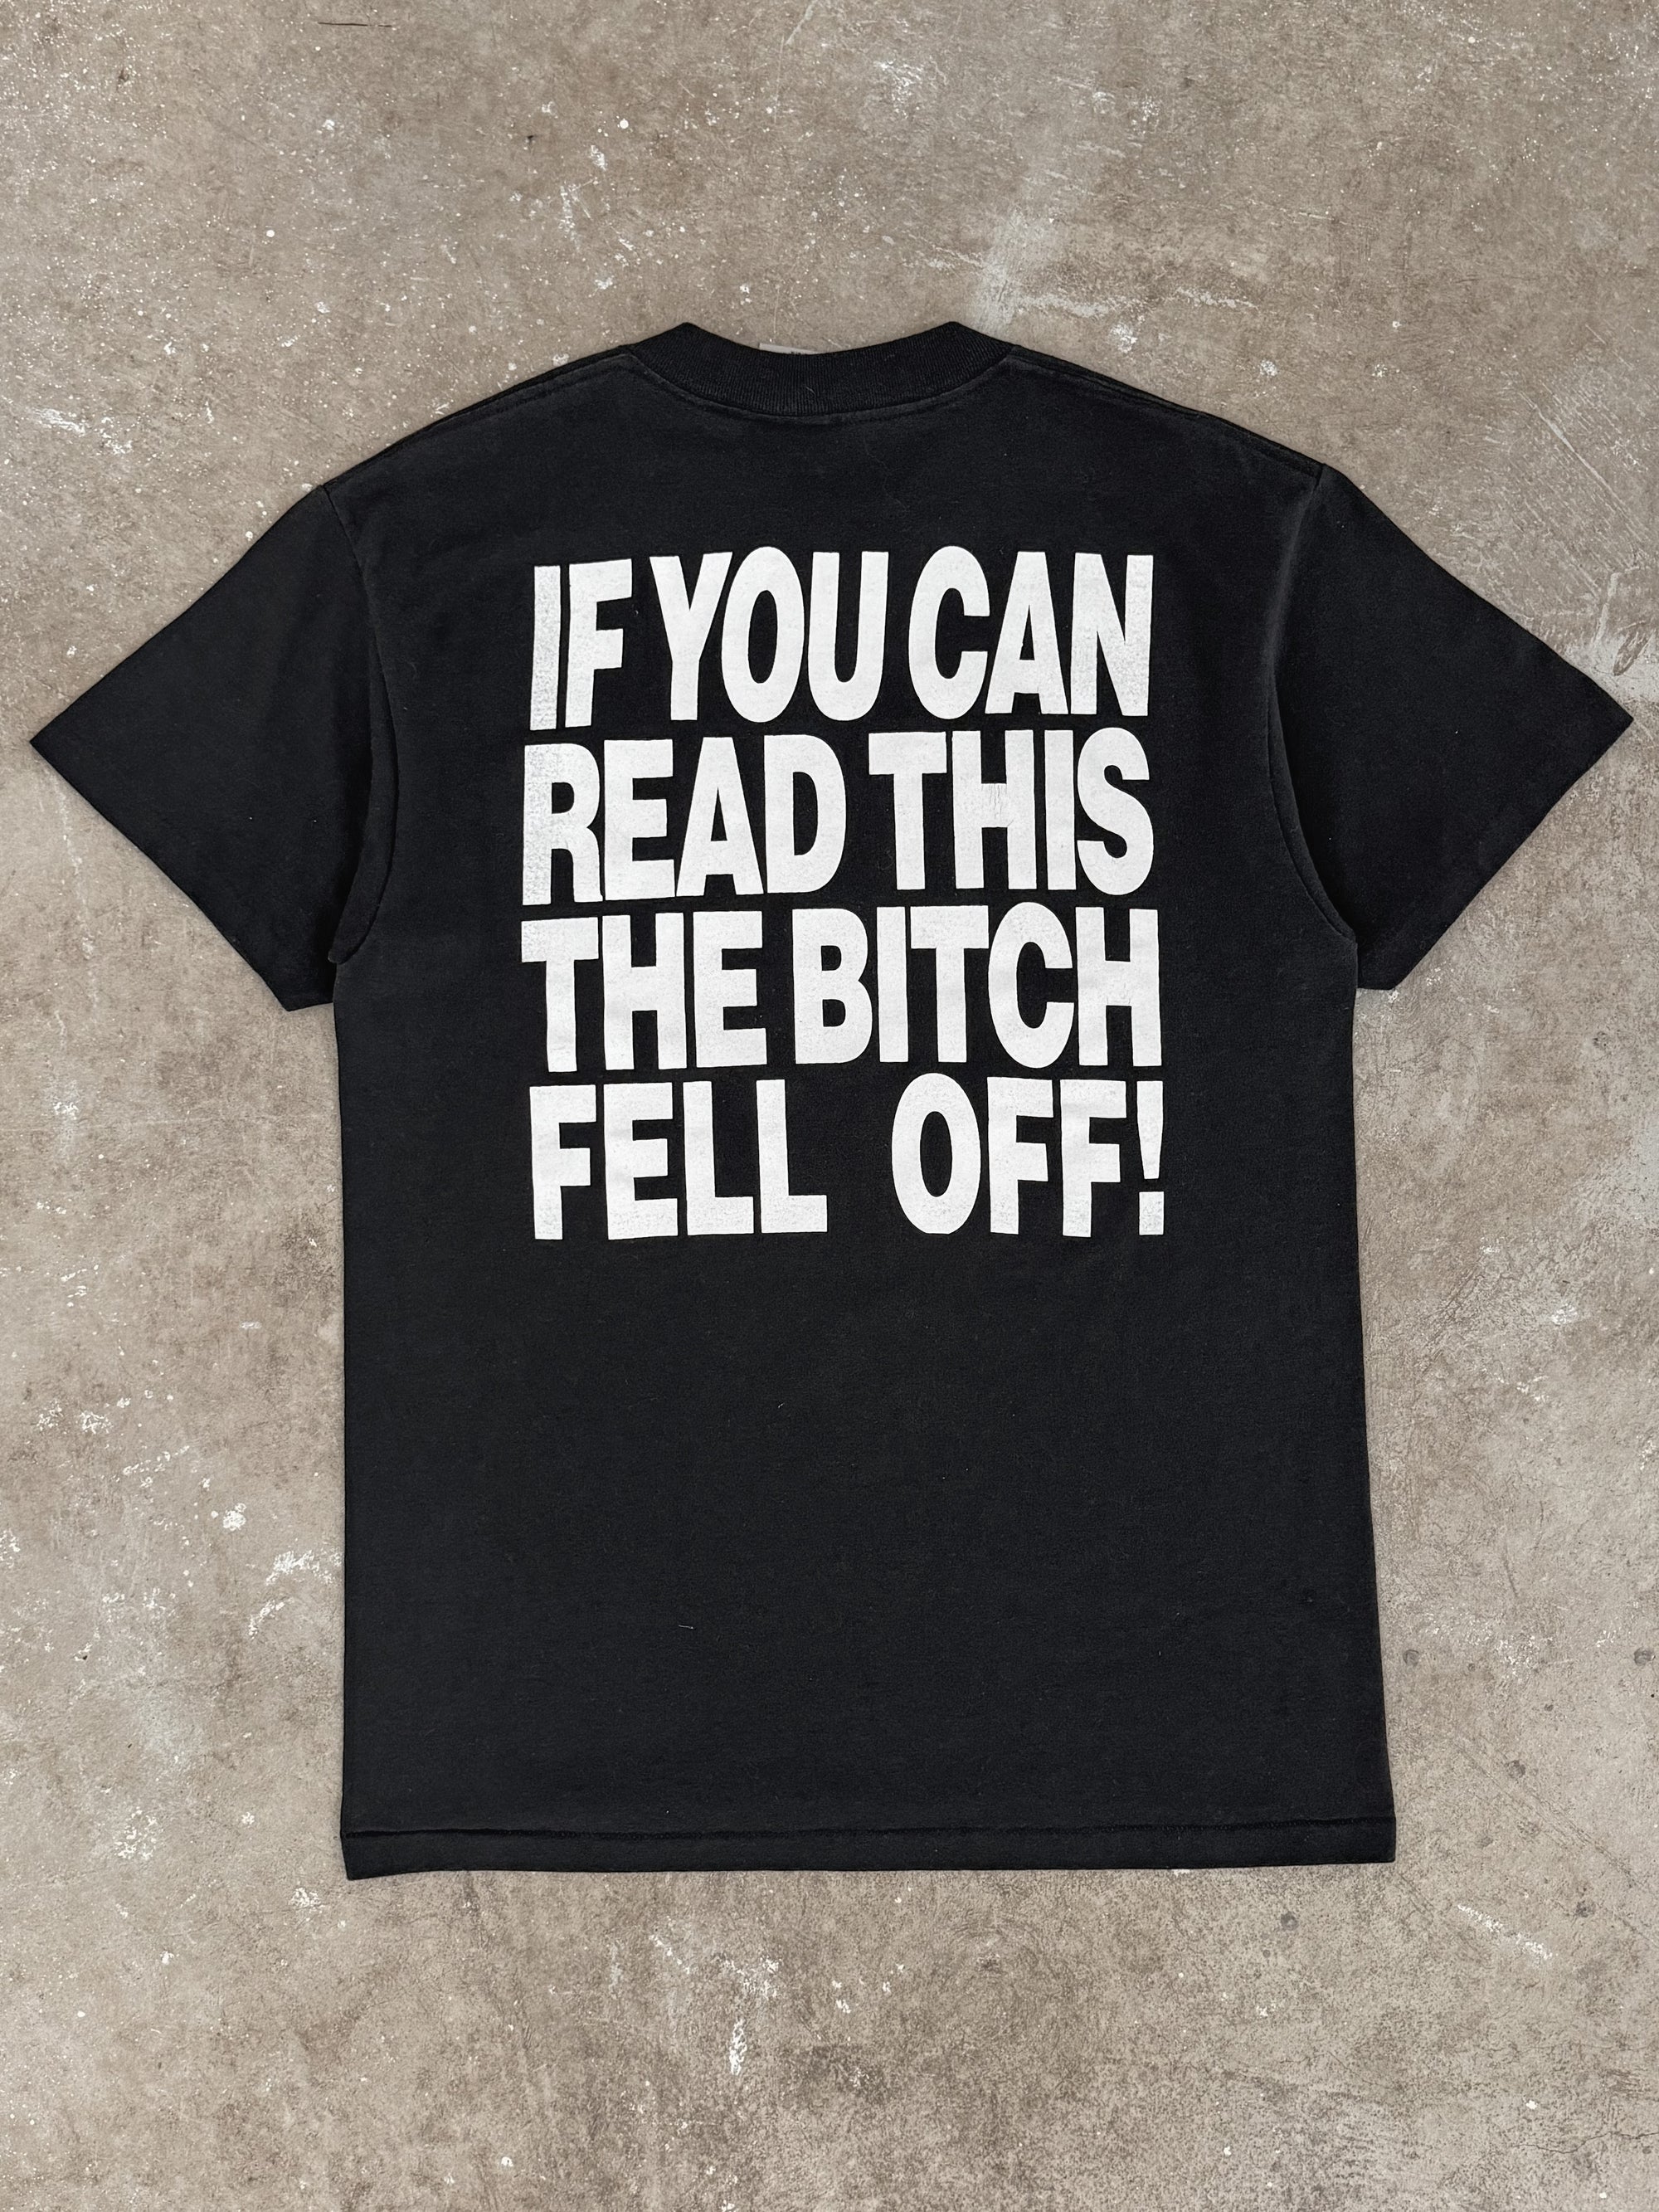 1990s "If You Can Read This..." Tee (M)